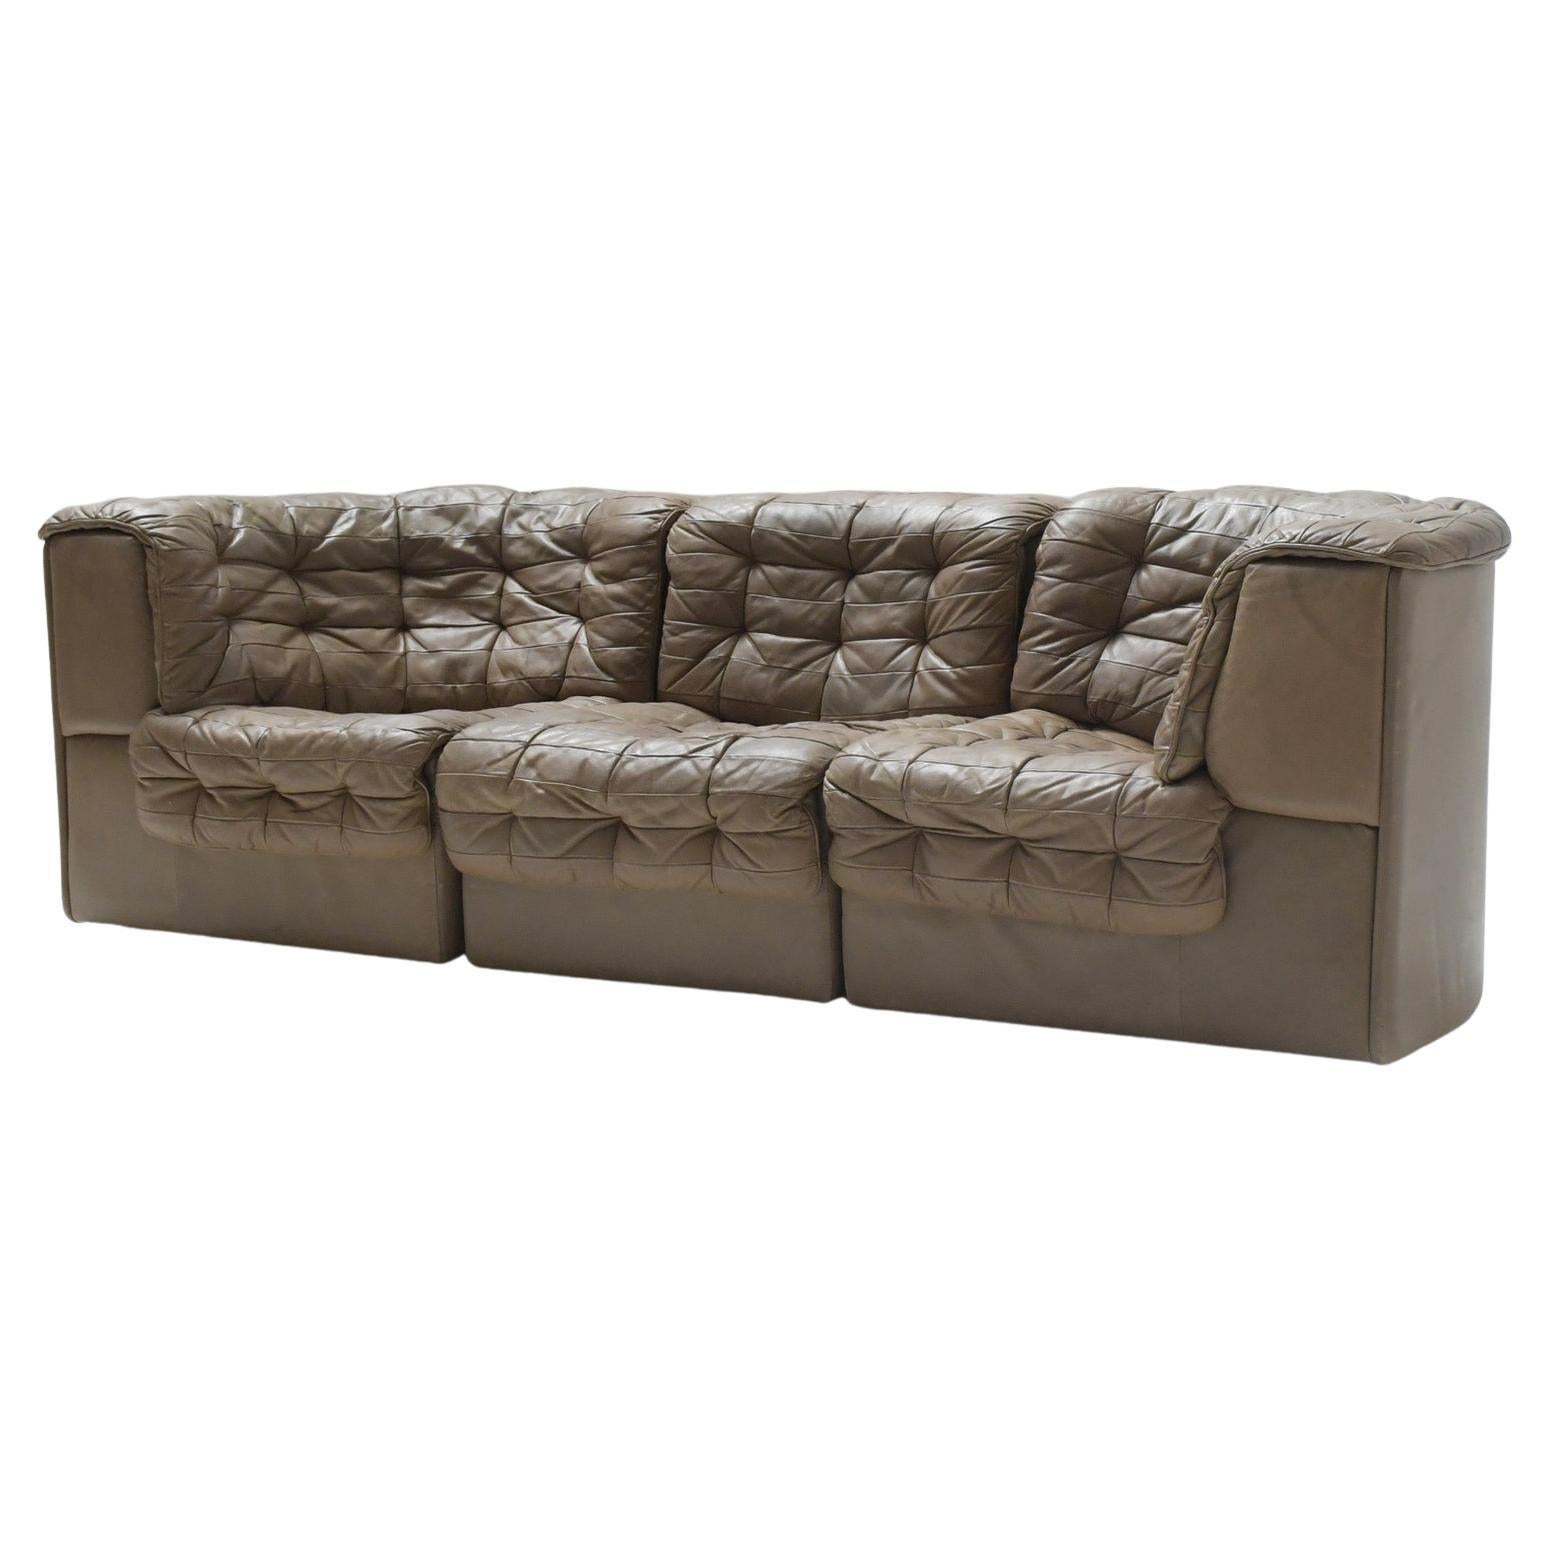 Ds 11 Modular Sofa in Brown Patchwork Leather by De Sede Team for De Sede Swiss For Sale